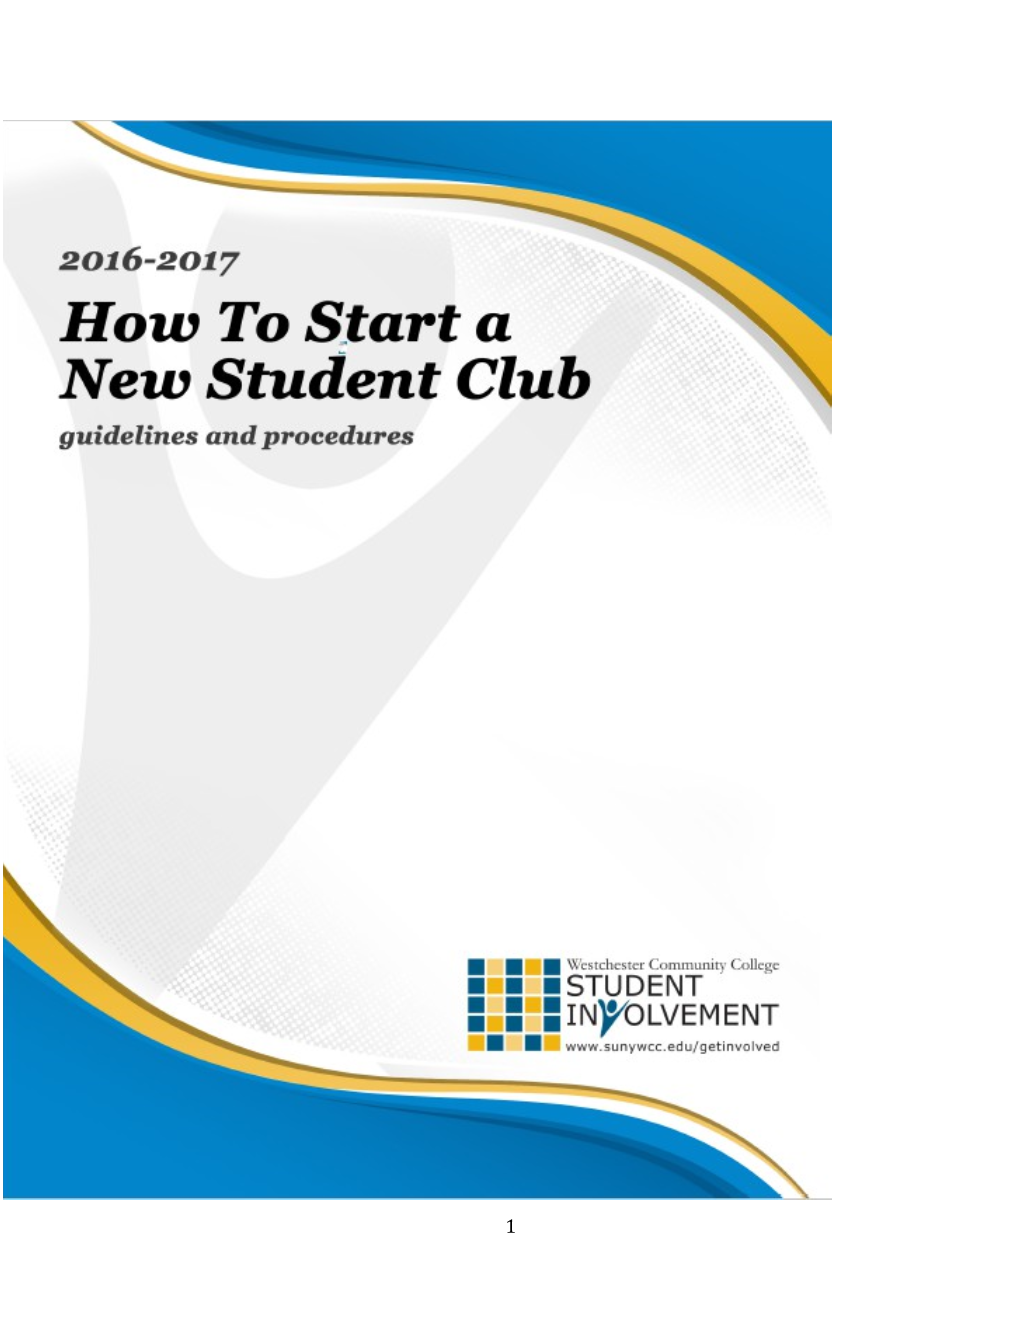 Procedure for Approving a Newstudent Club